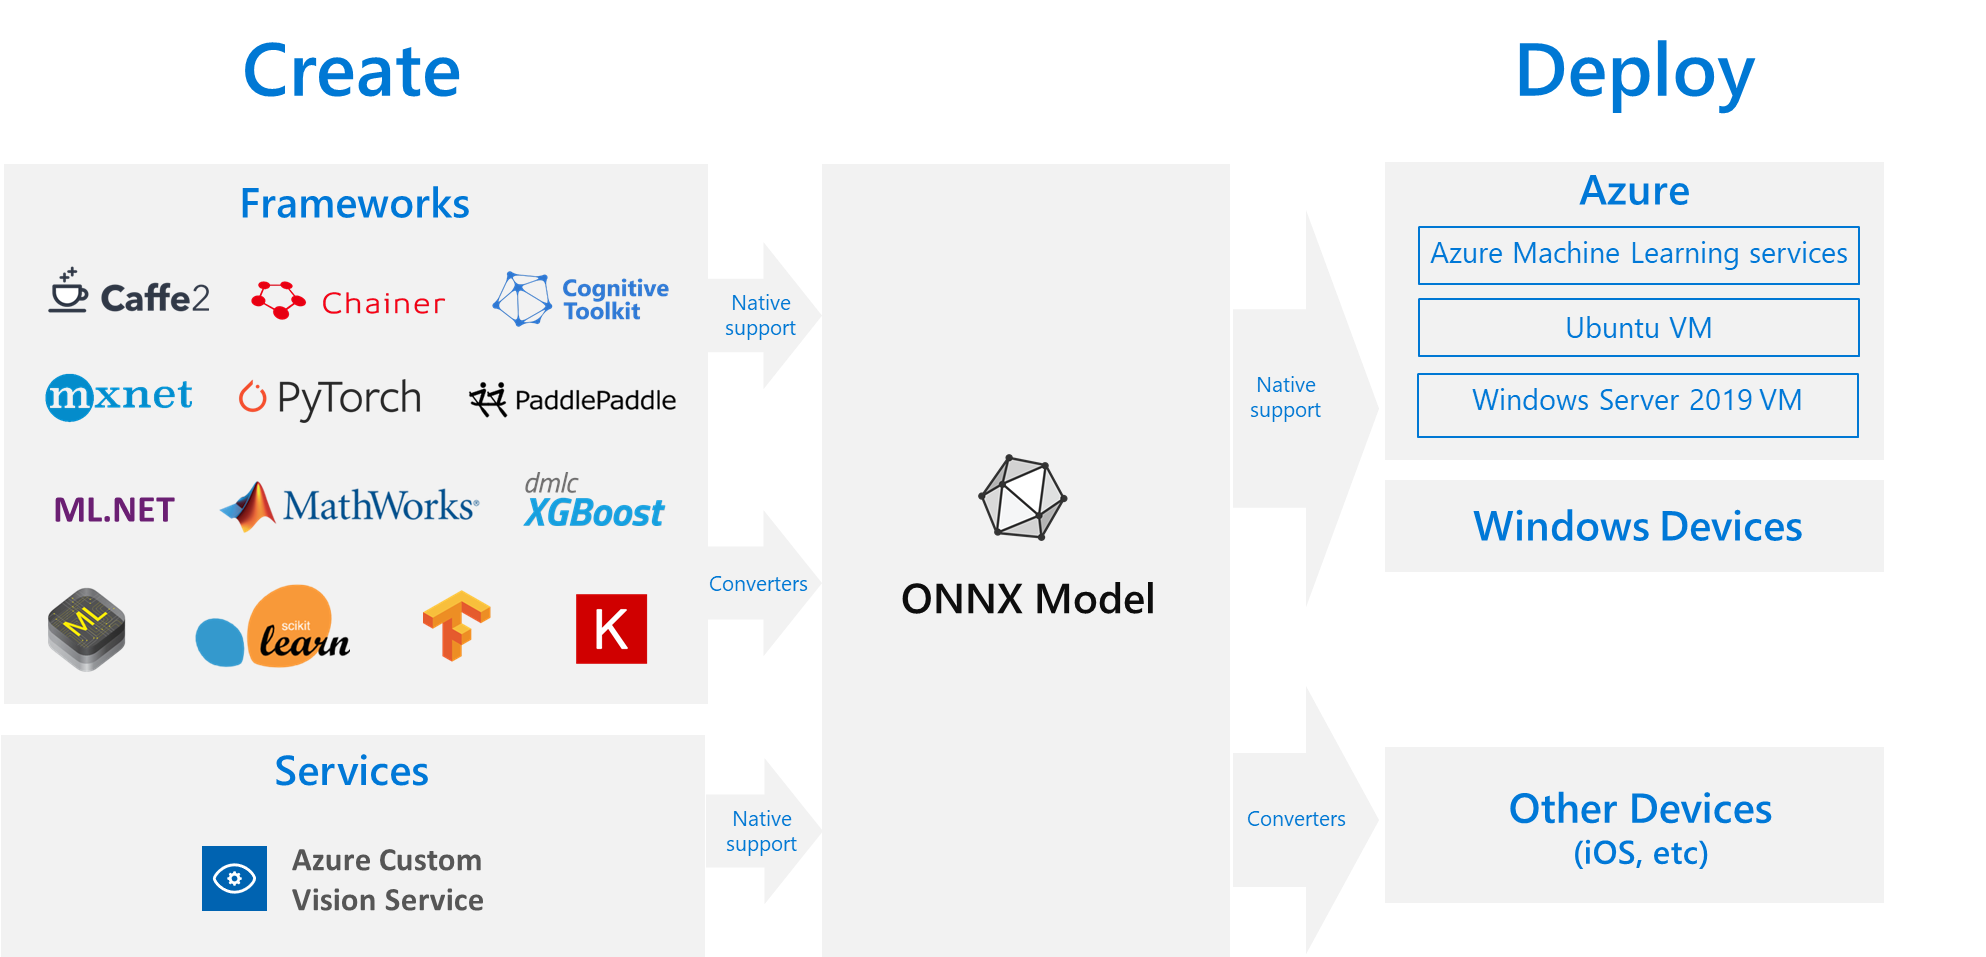 ONNX flow diagram showing training, converters, and deployment